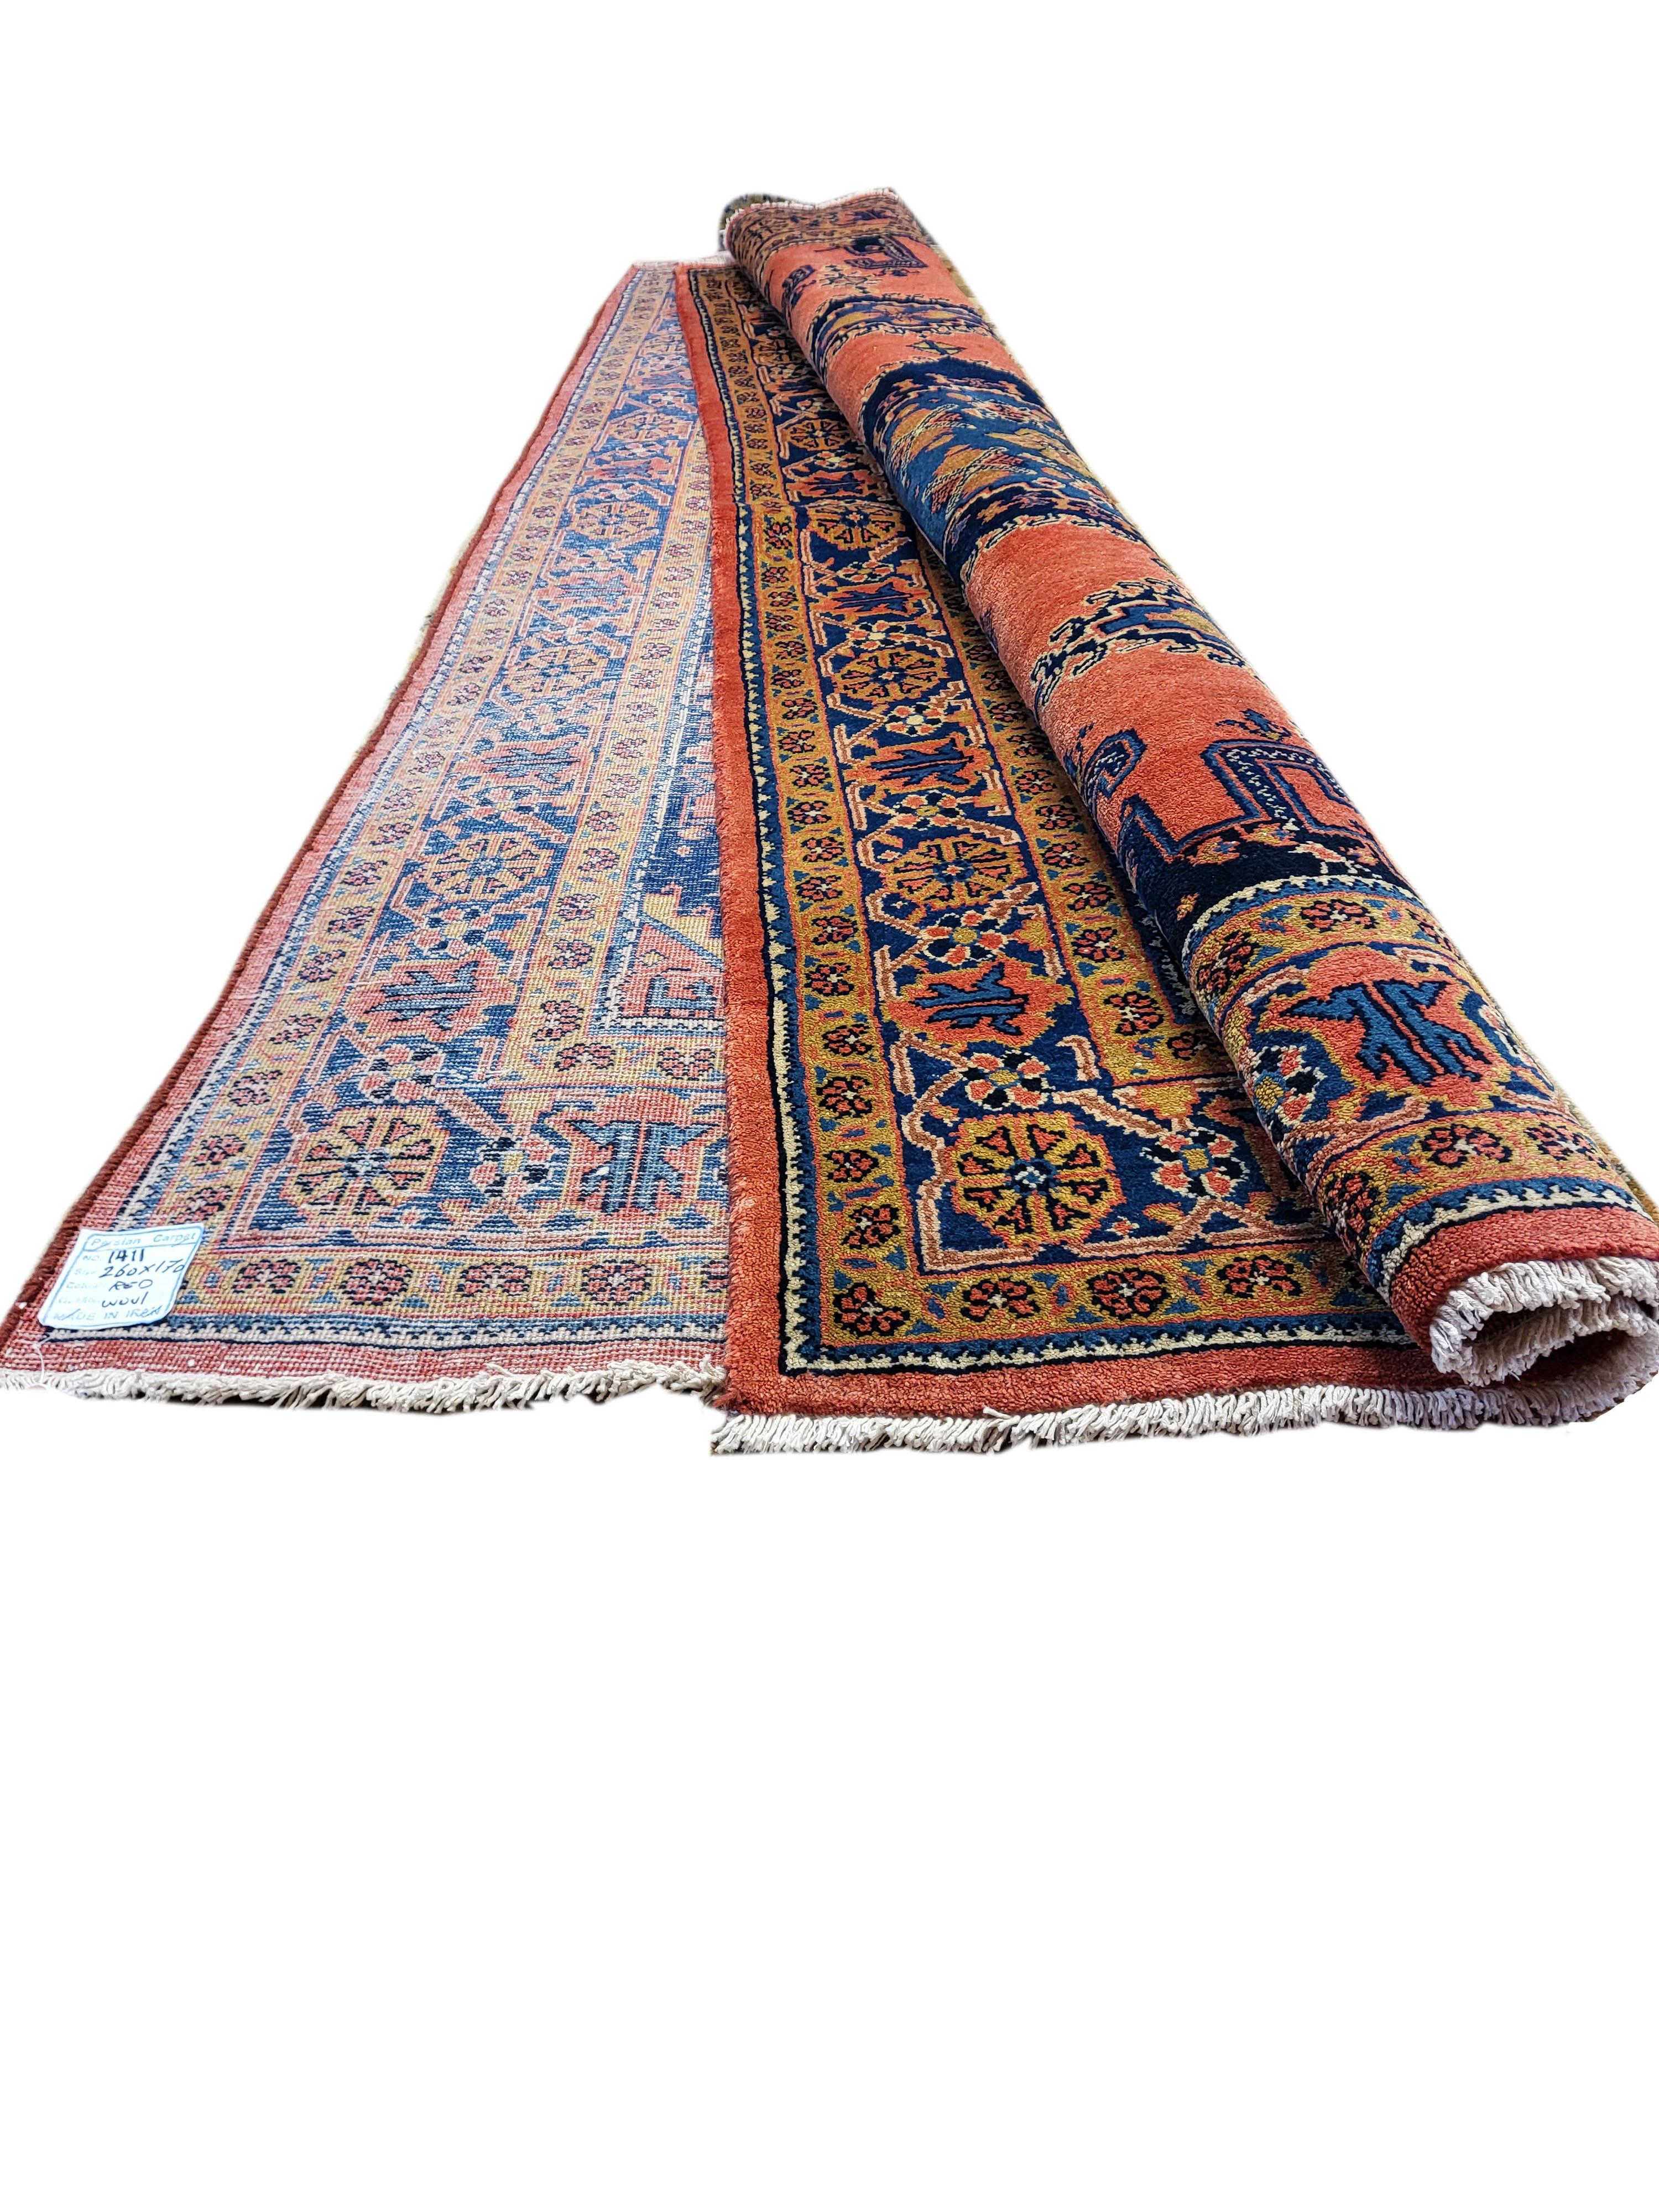 Stunning 50's Persian Arak. Often referred to as a Sarouk rug this piece is actually more specifically woven in Arak. Known for this signature color-scheme and unique boarders. These rugs are plush and woven with very fine wool. The fine wool makes